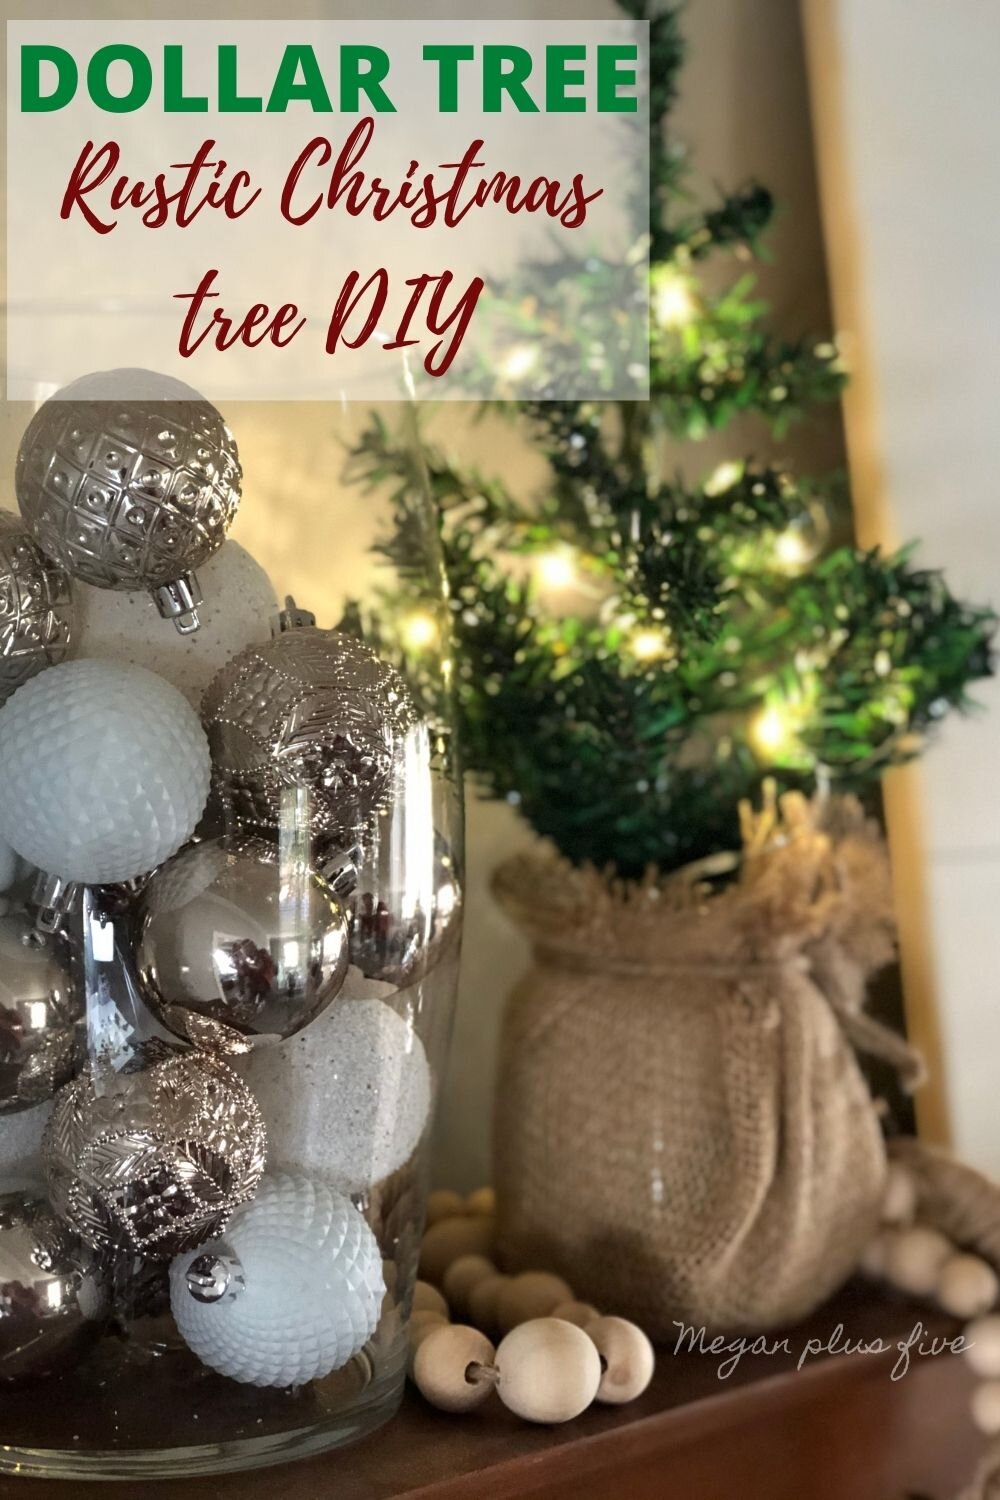 DIY Dollar Tree farmhouse Christmas tree. What to do with the mini Christmas trees from the dollar tree. Easy way to use the cheap Christmas trees from the dollar store. Rustic farmhouse Christmas decor on a budget.